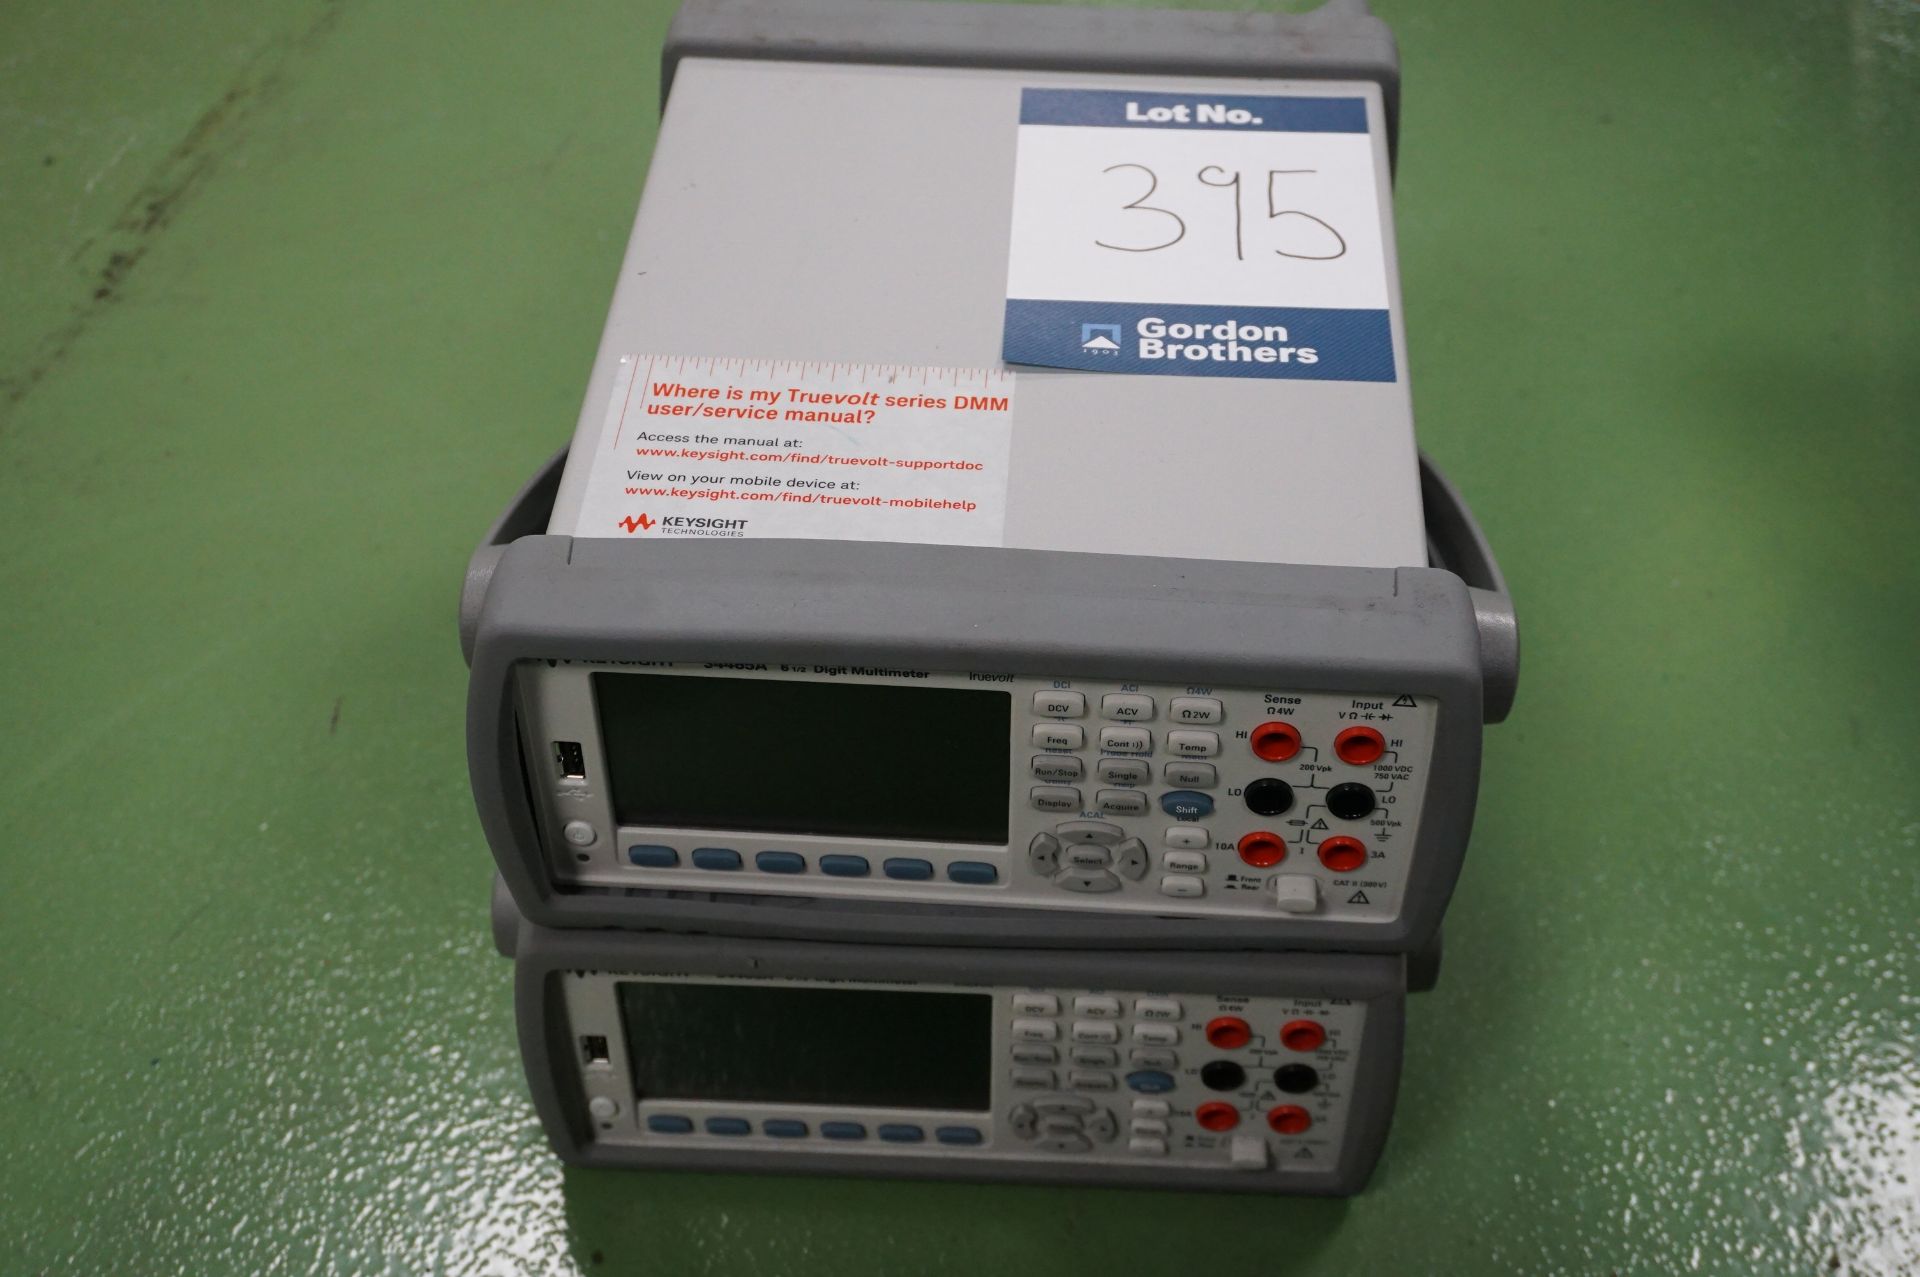 2 x Keysight 34465A 6 1/2 Digit Multimeters with readout screen